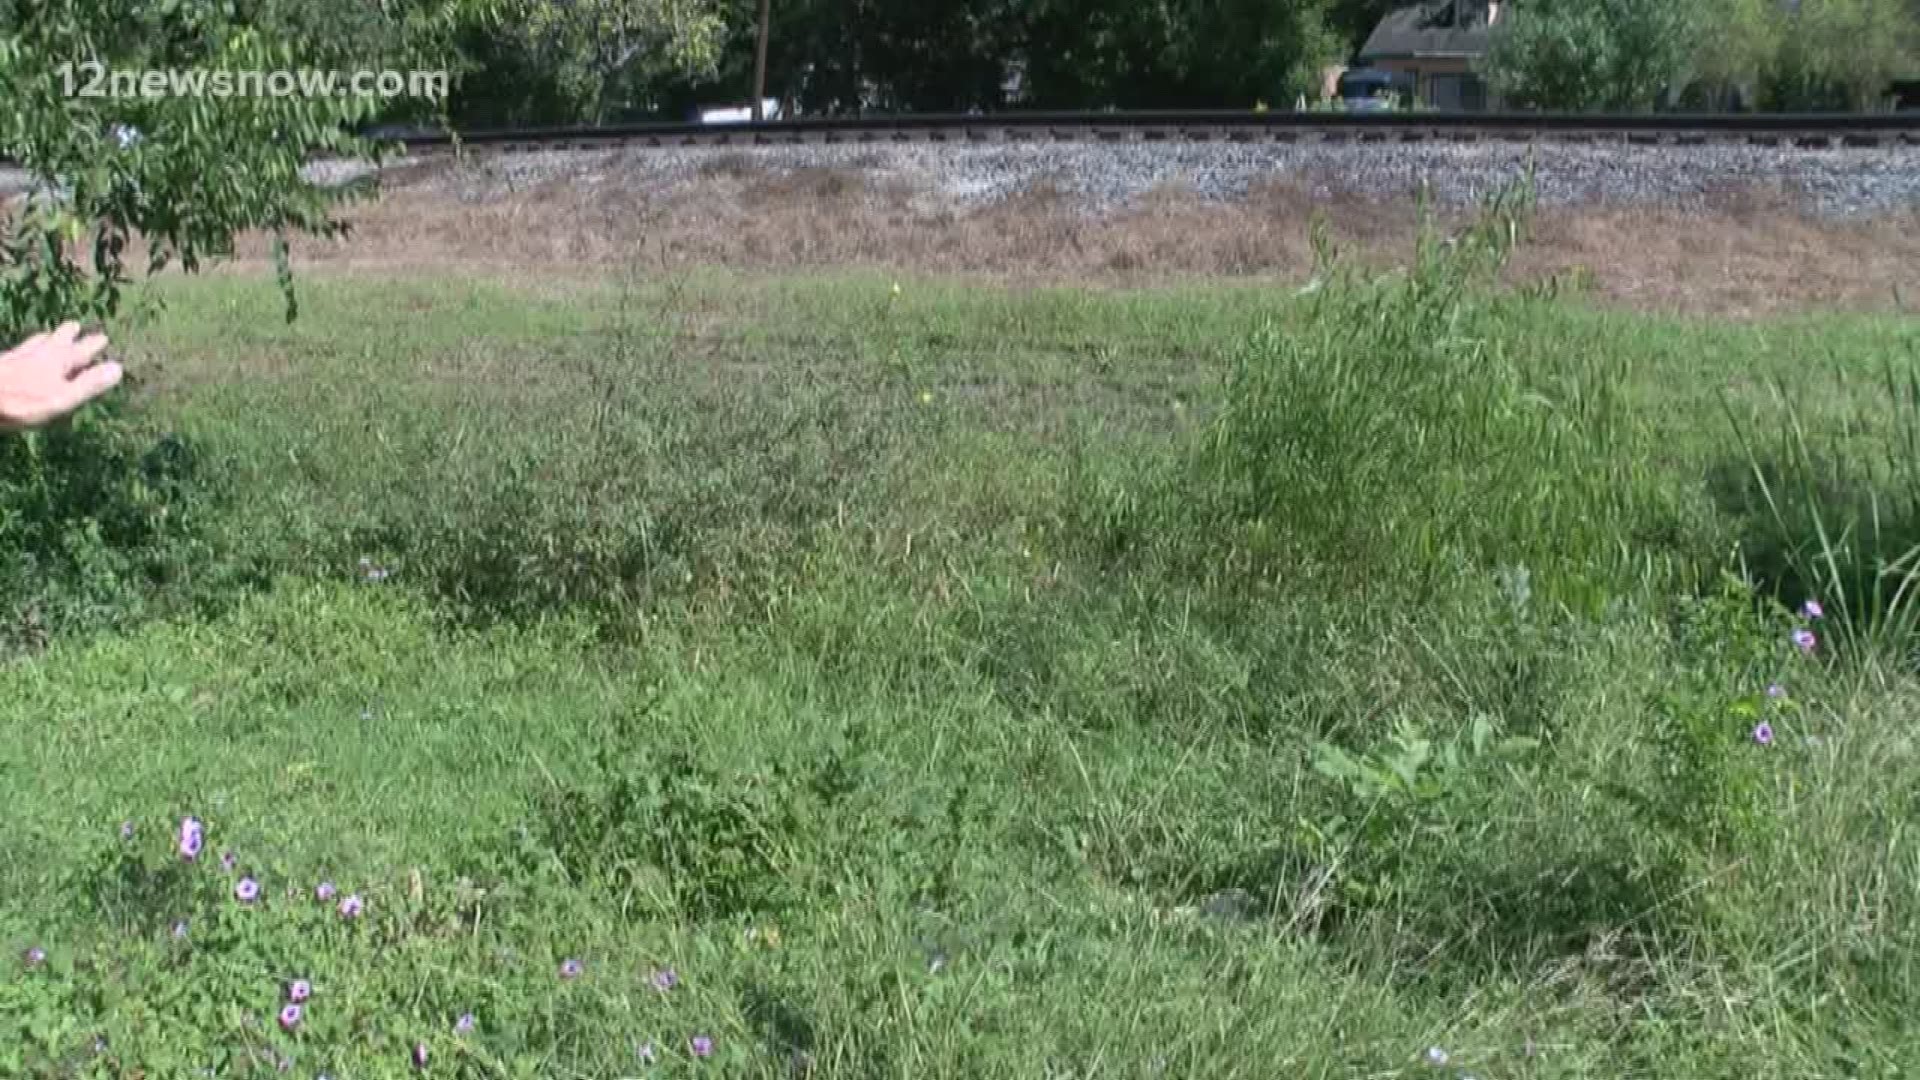 70-year-old Port Arthur man pleads with city to clear overgrown drainage ditch